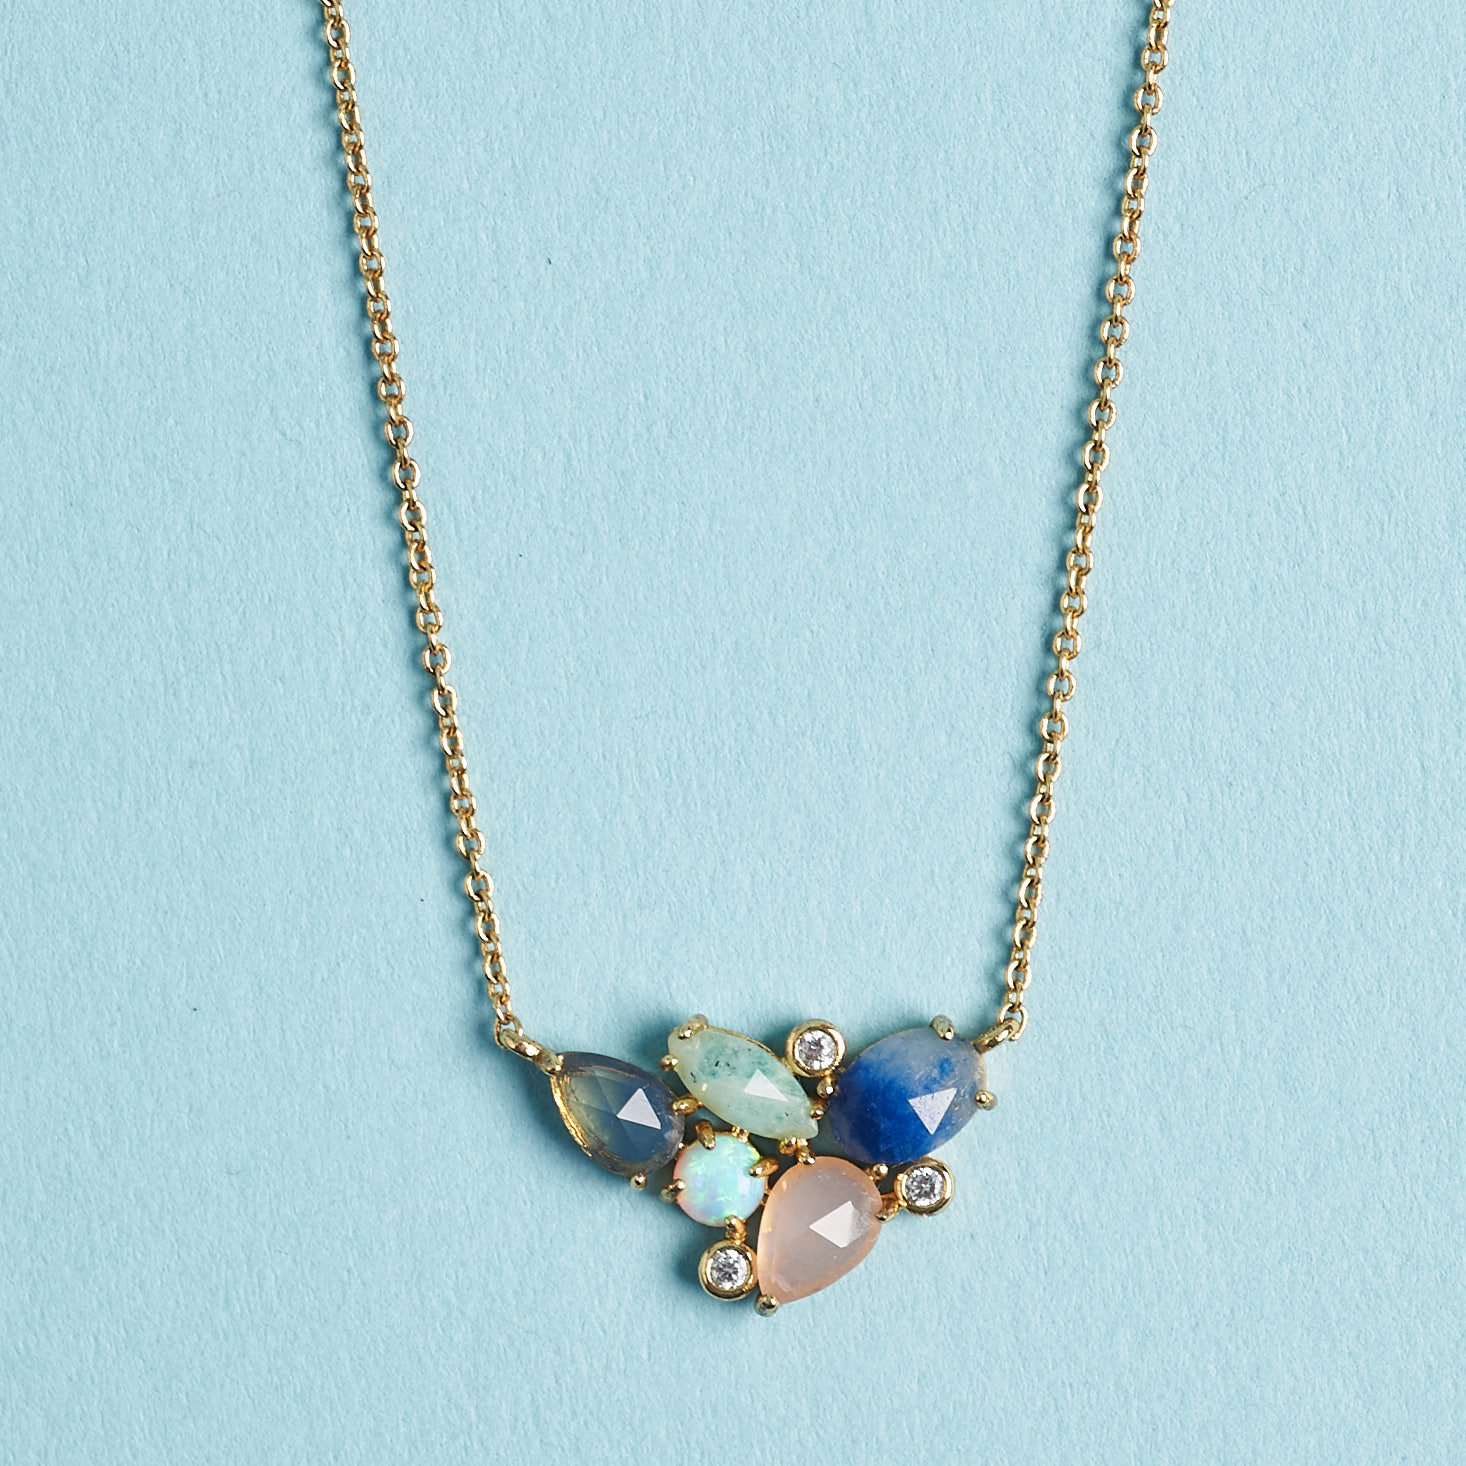 Rocksbox June 2019 Jewelry subscription review necklace